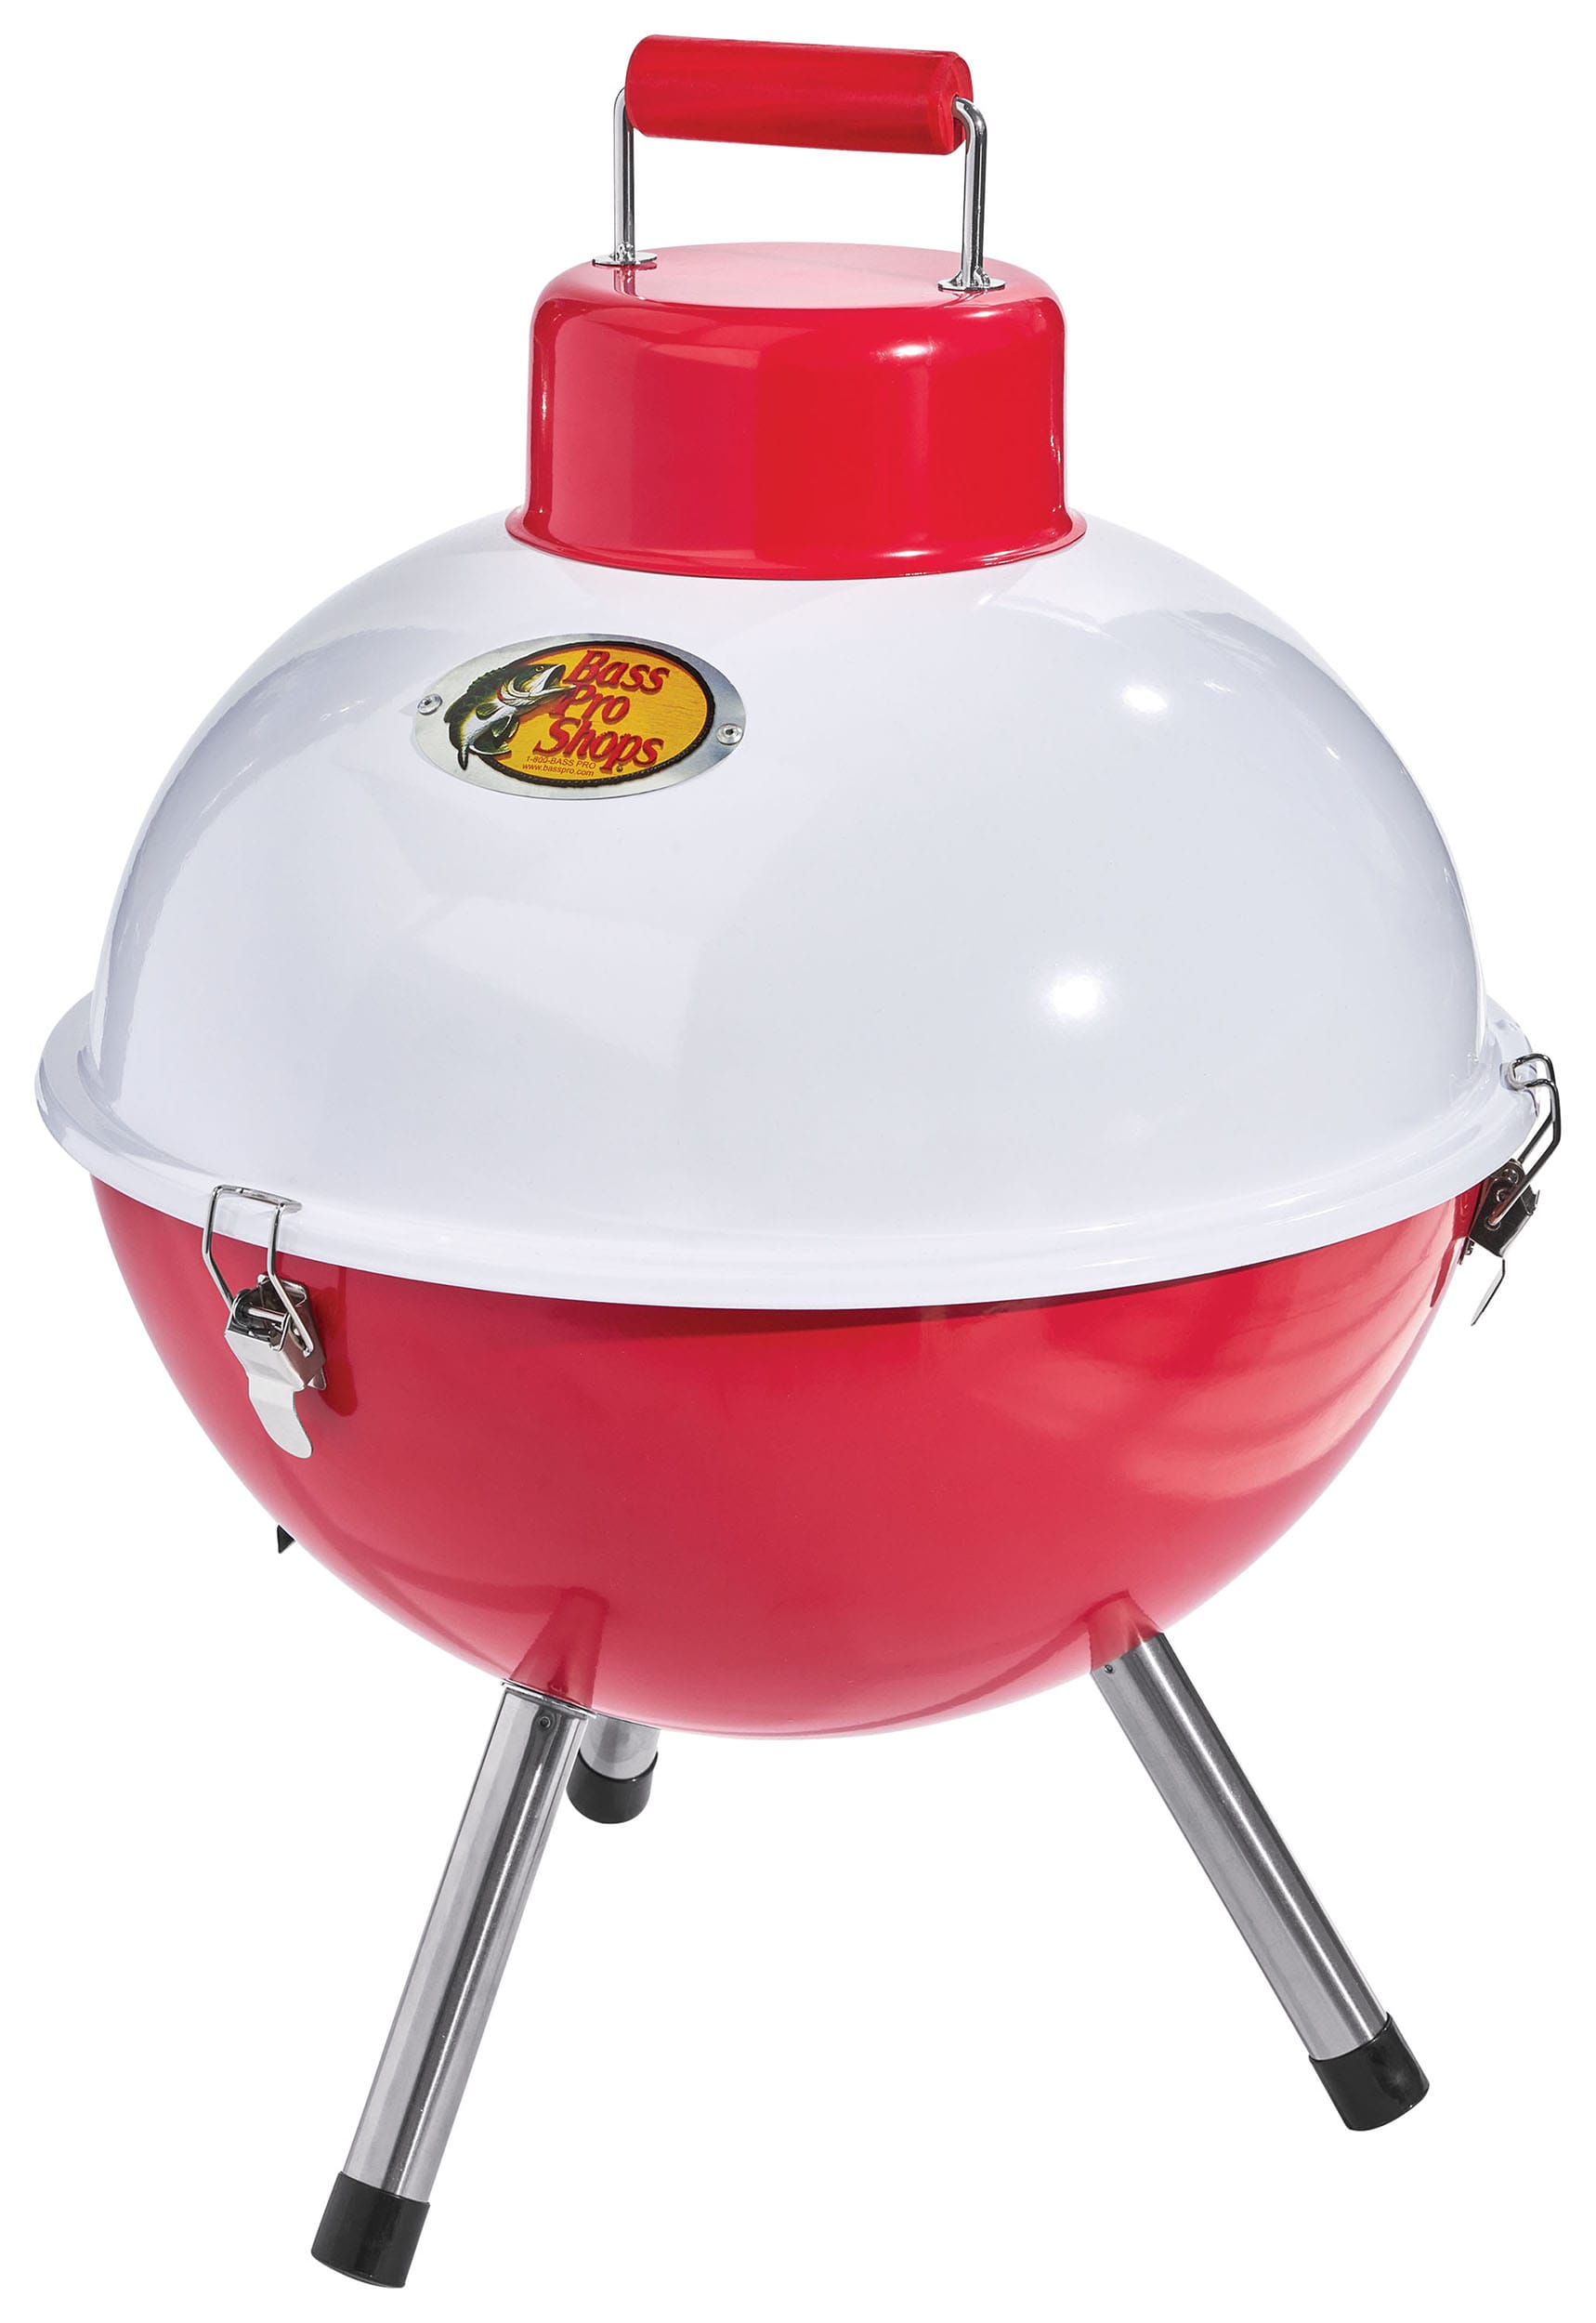 Bass Pro Shops® Bobber Table Top Charcoal Grill